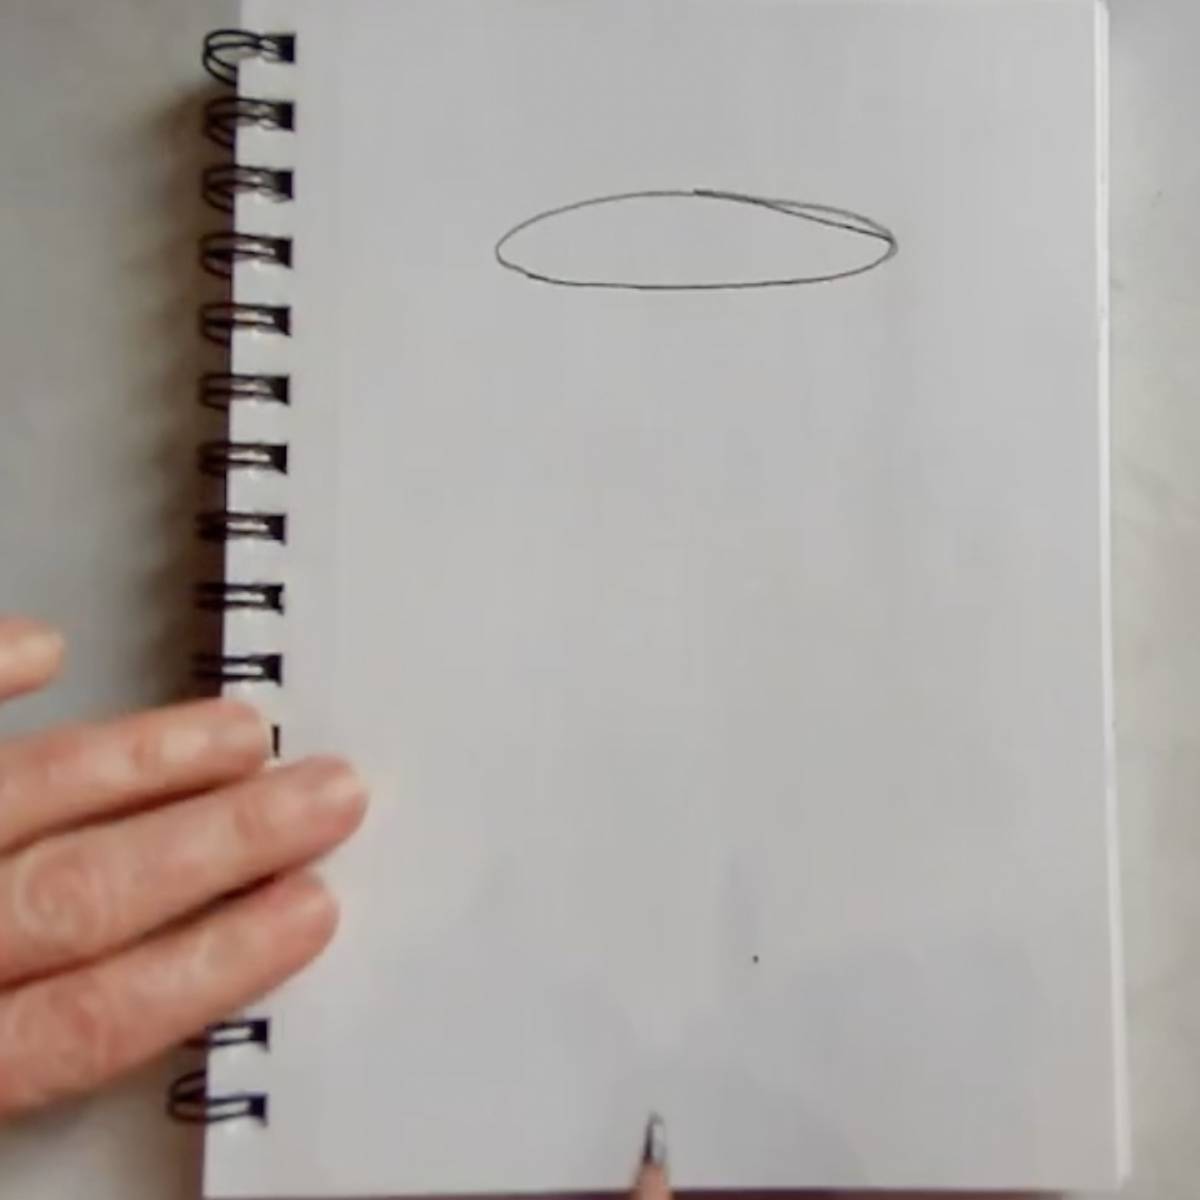 Draw an oval for the top